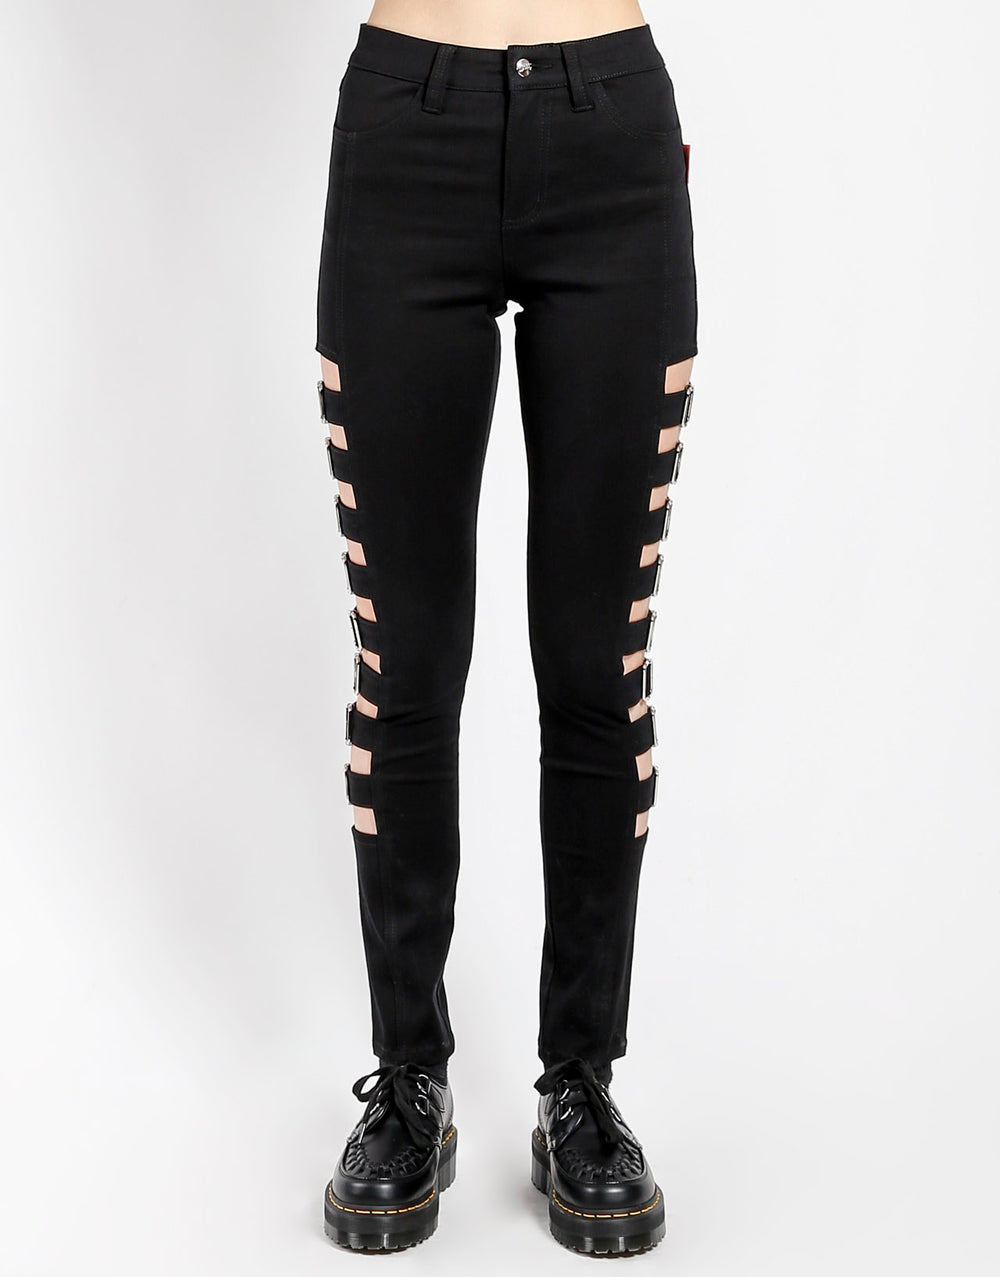 SIDE BUCKLE PANT